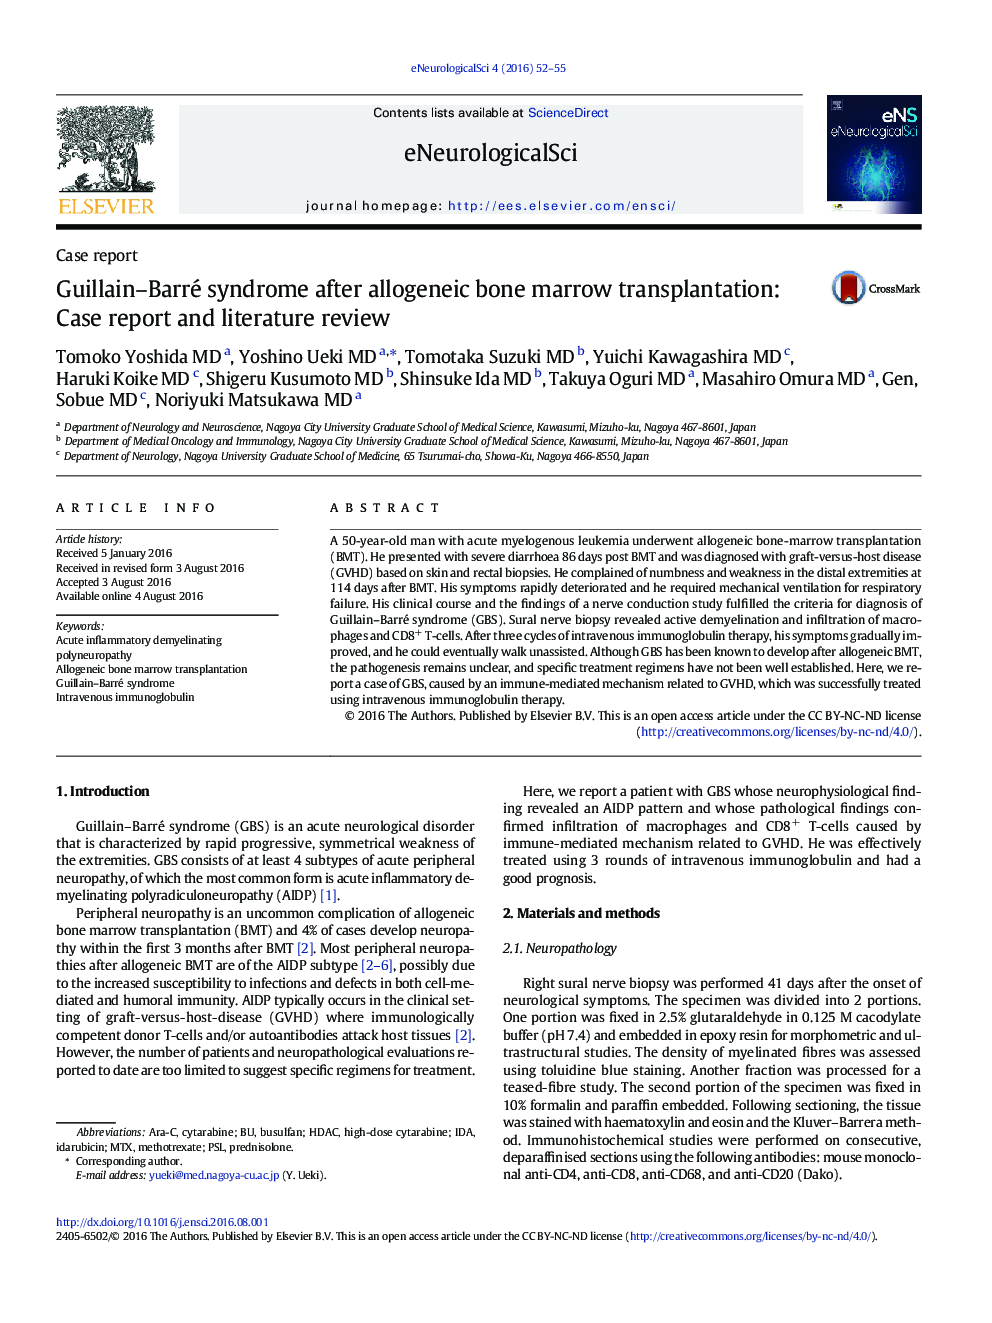 Guillain–Barré syndrome after allogeneic bone marrow transplantation: Case report and literature review